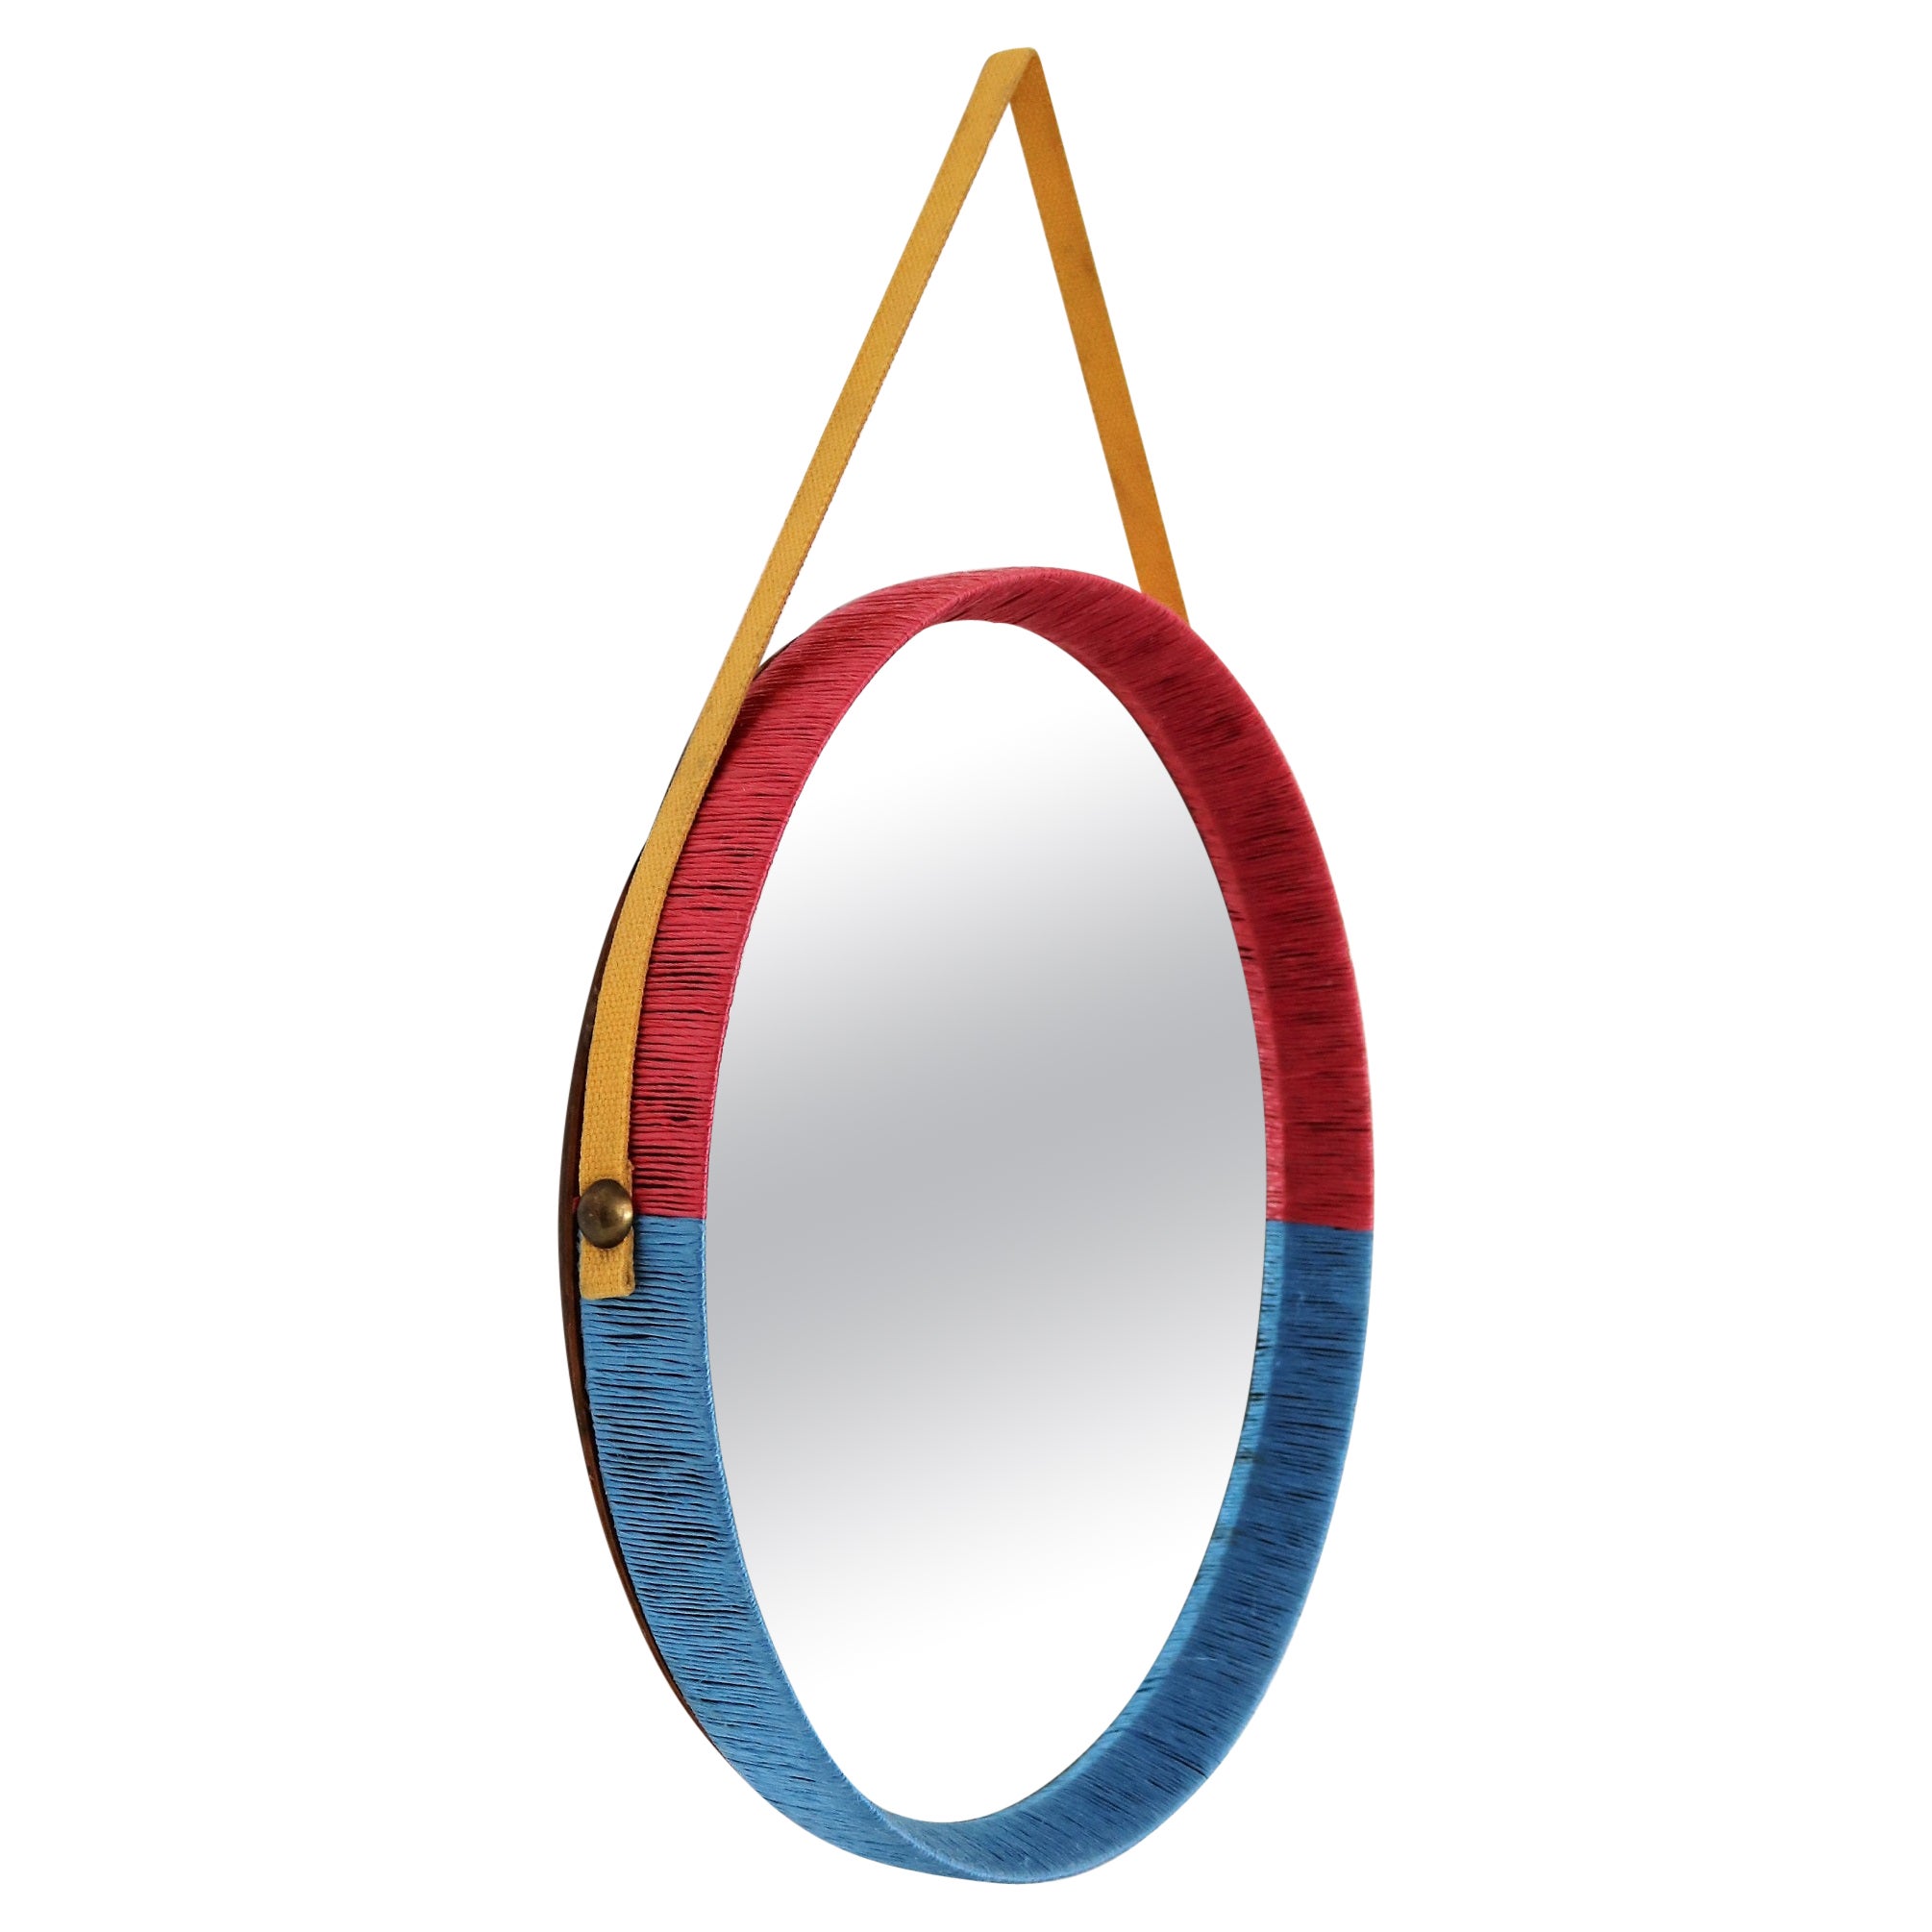 Italian Midcentury Wall Mirror in Red and Blue with Yellow Ribbon, 1950s For Sale